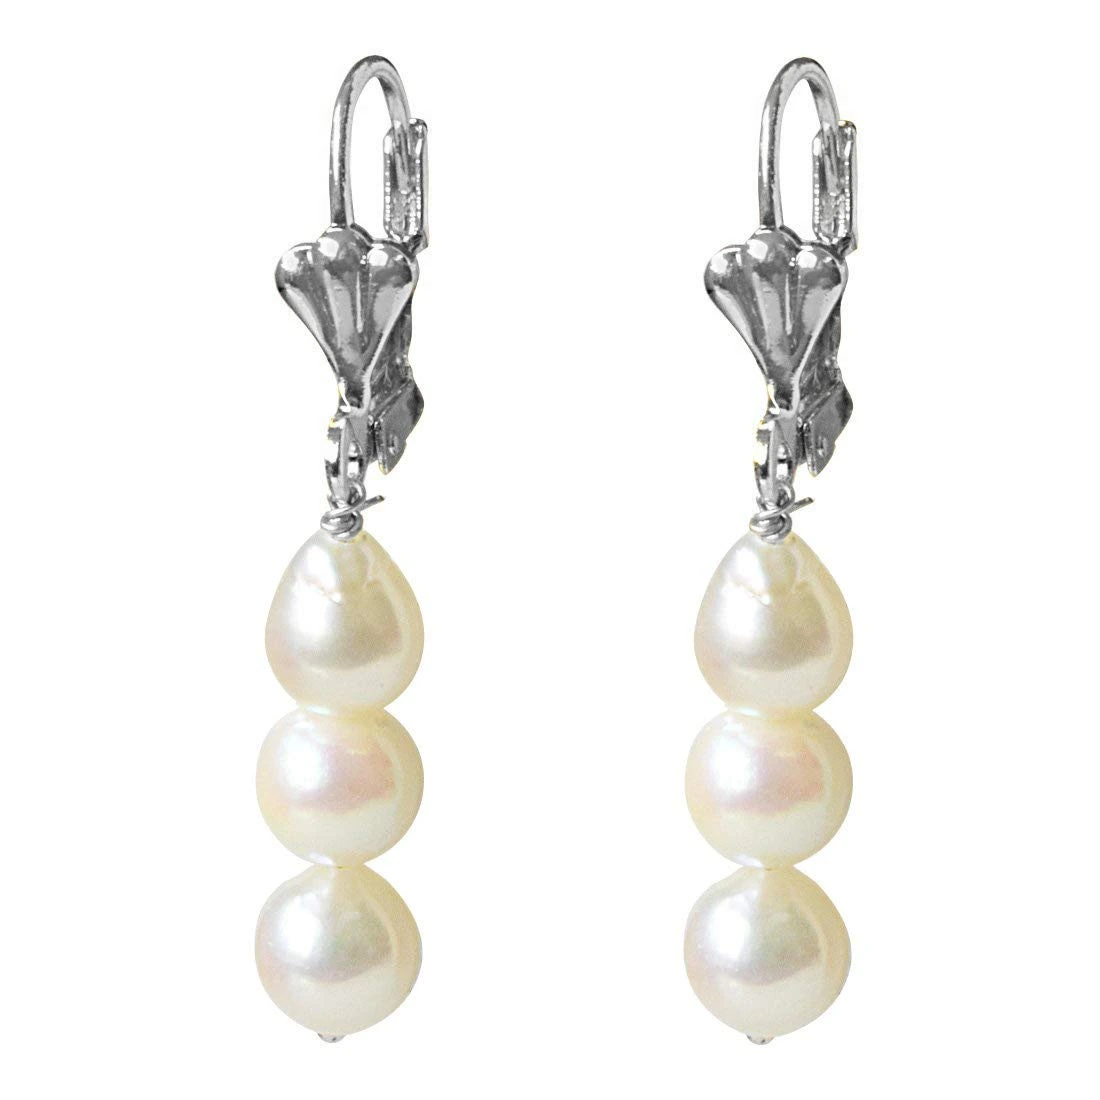 Real Natural Cultured Pearl and Flower Shaped Silver Plated Hanging Earrings for Women (SE362)